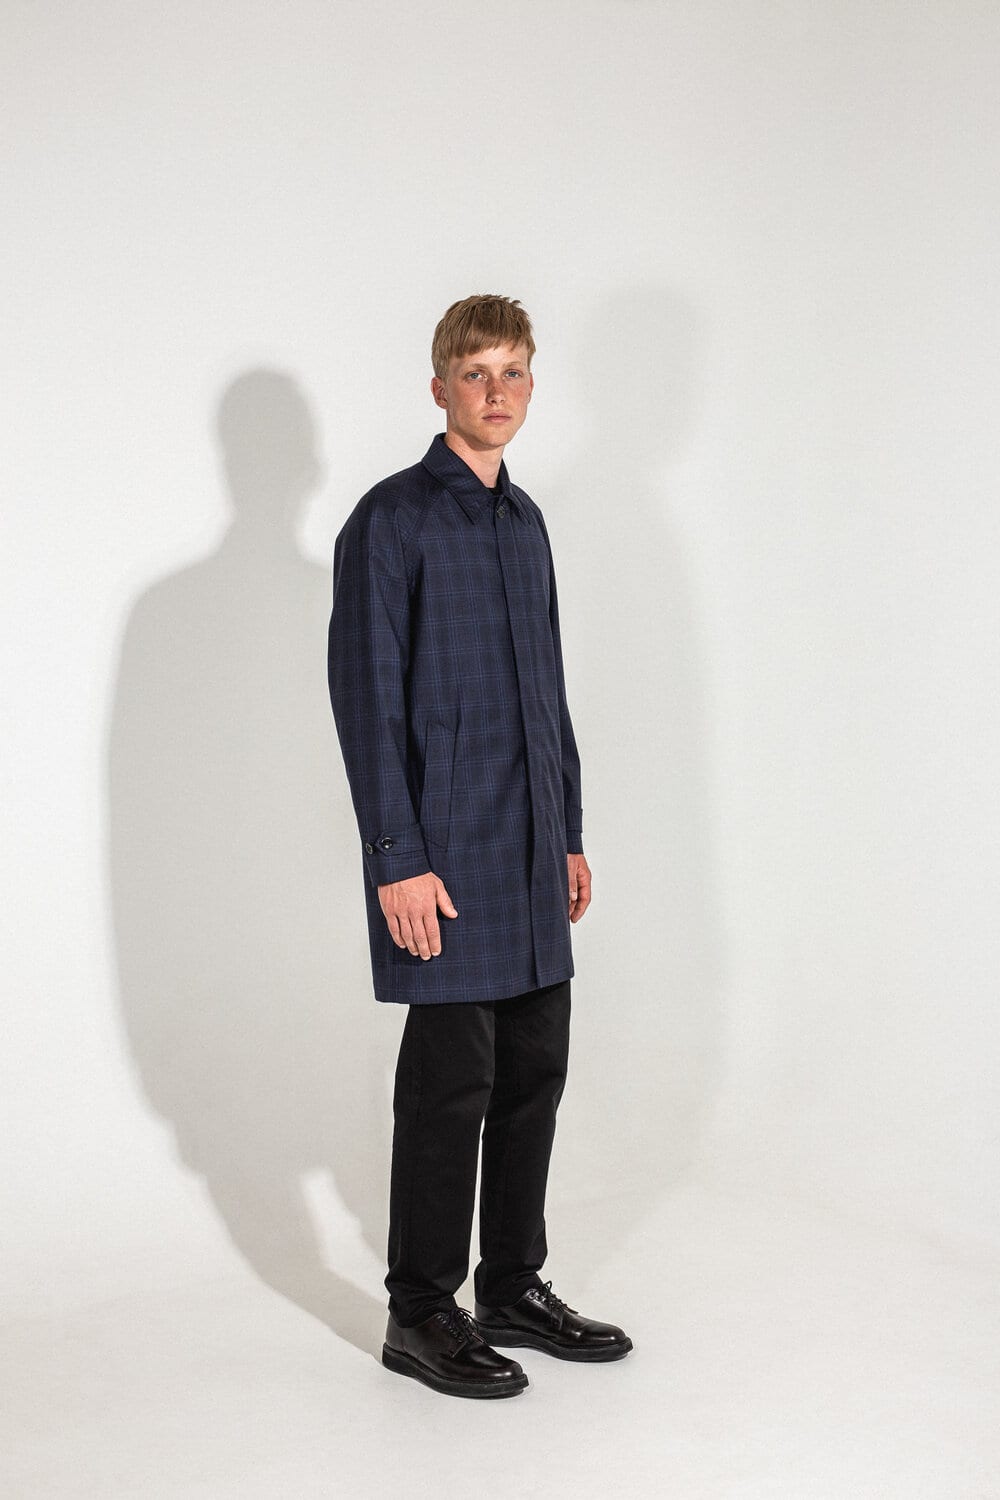 lookbook norse projects sp20 Premium Function 1